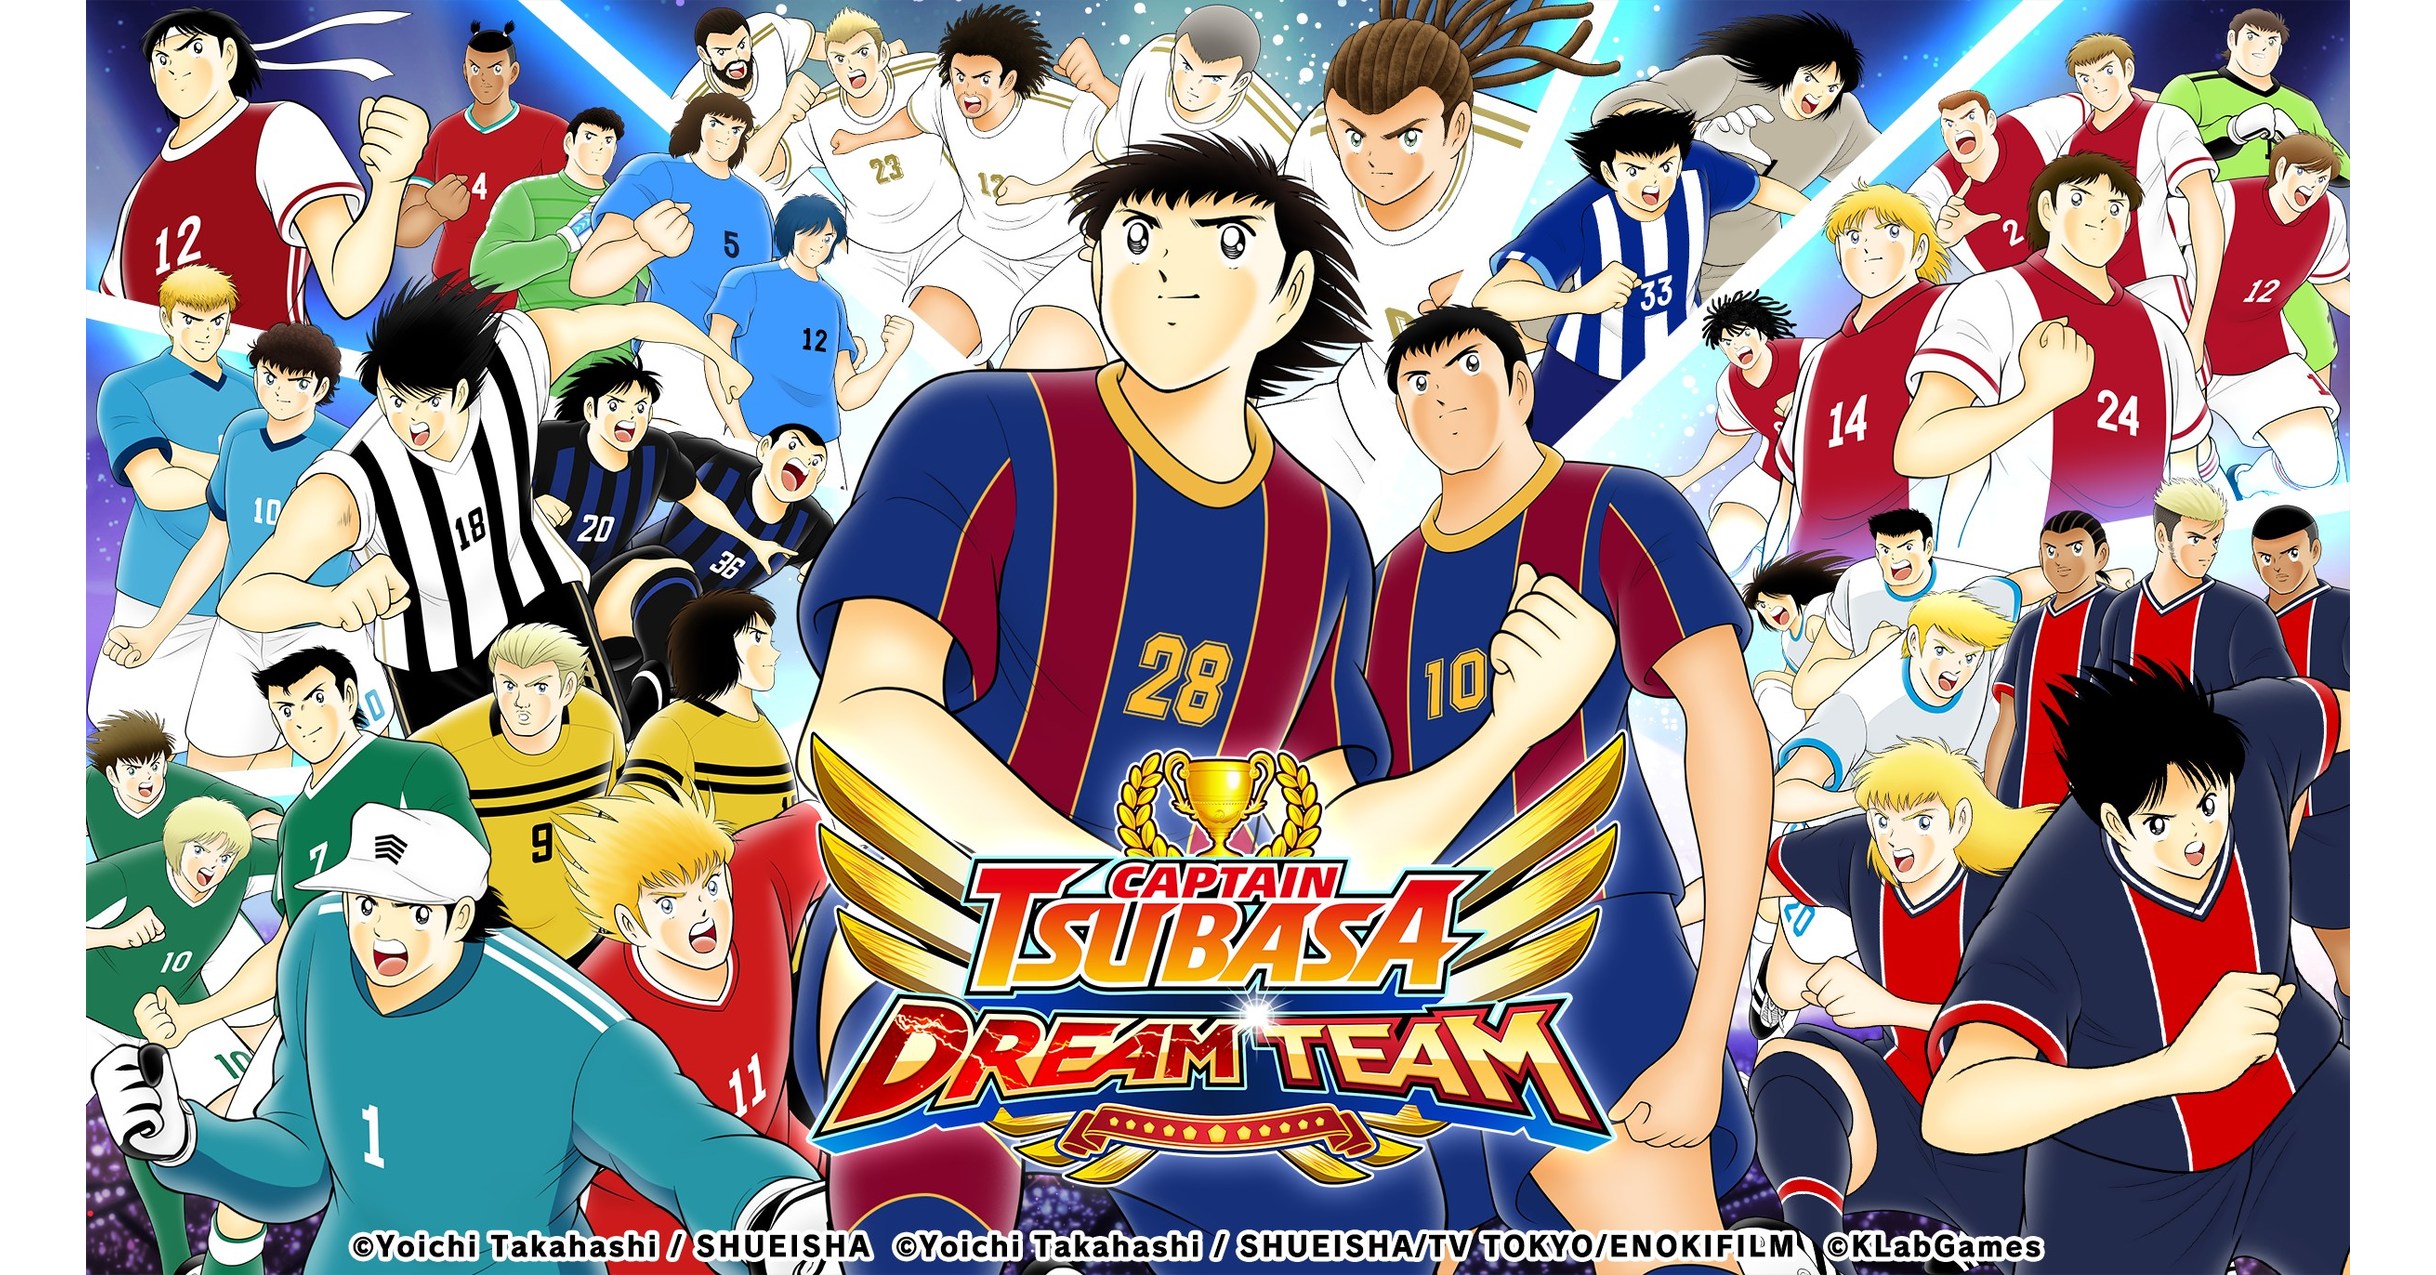 New Chapters for NEXT DREAM Original Story from Yoichi Takahashi Debut in Captain Tsubasa: Dream Team